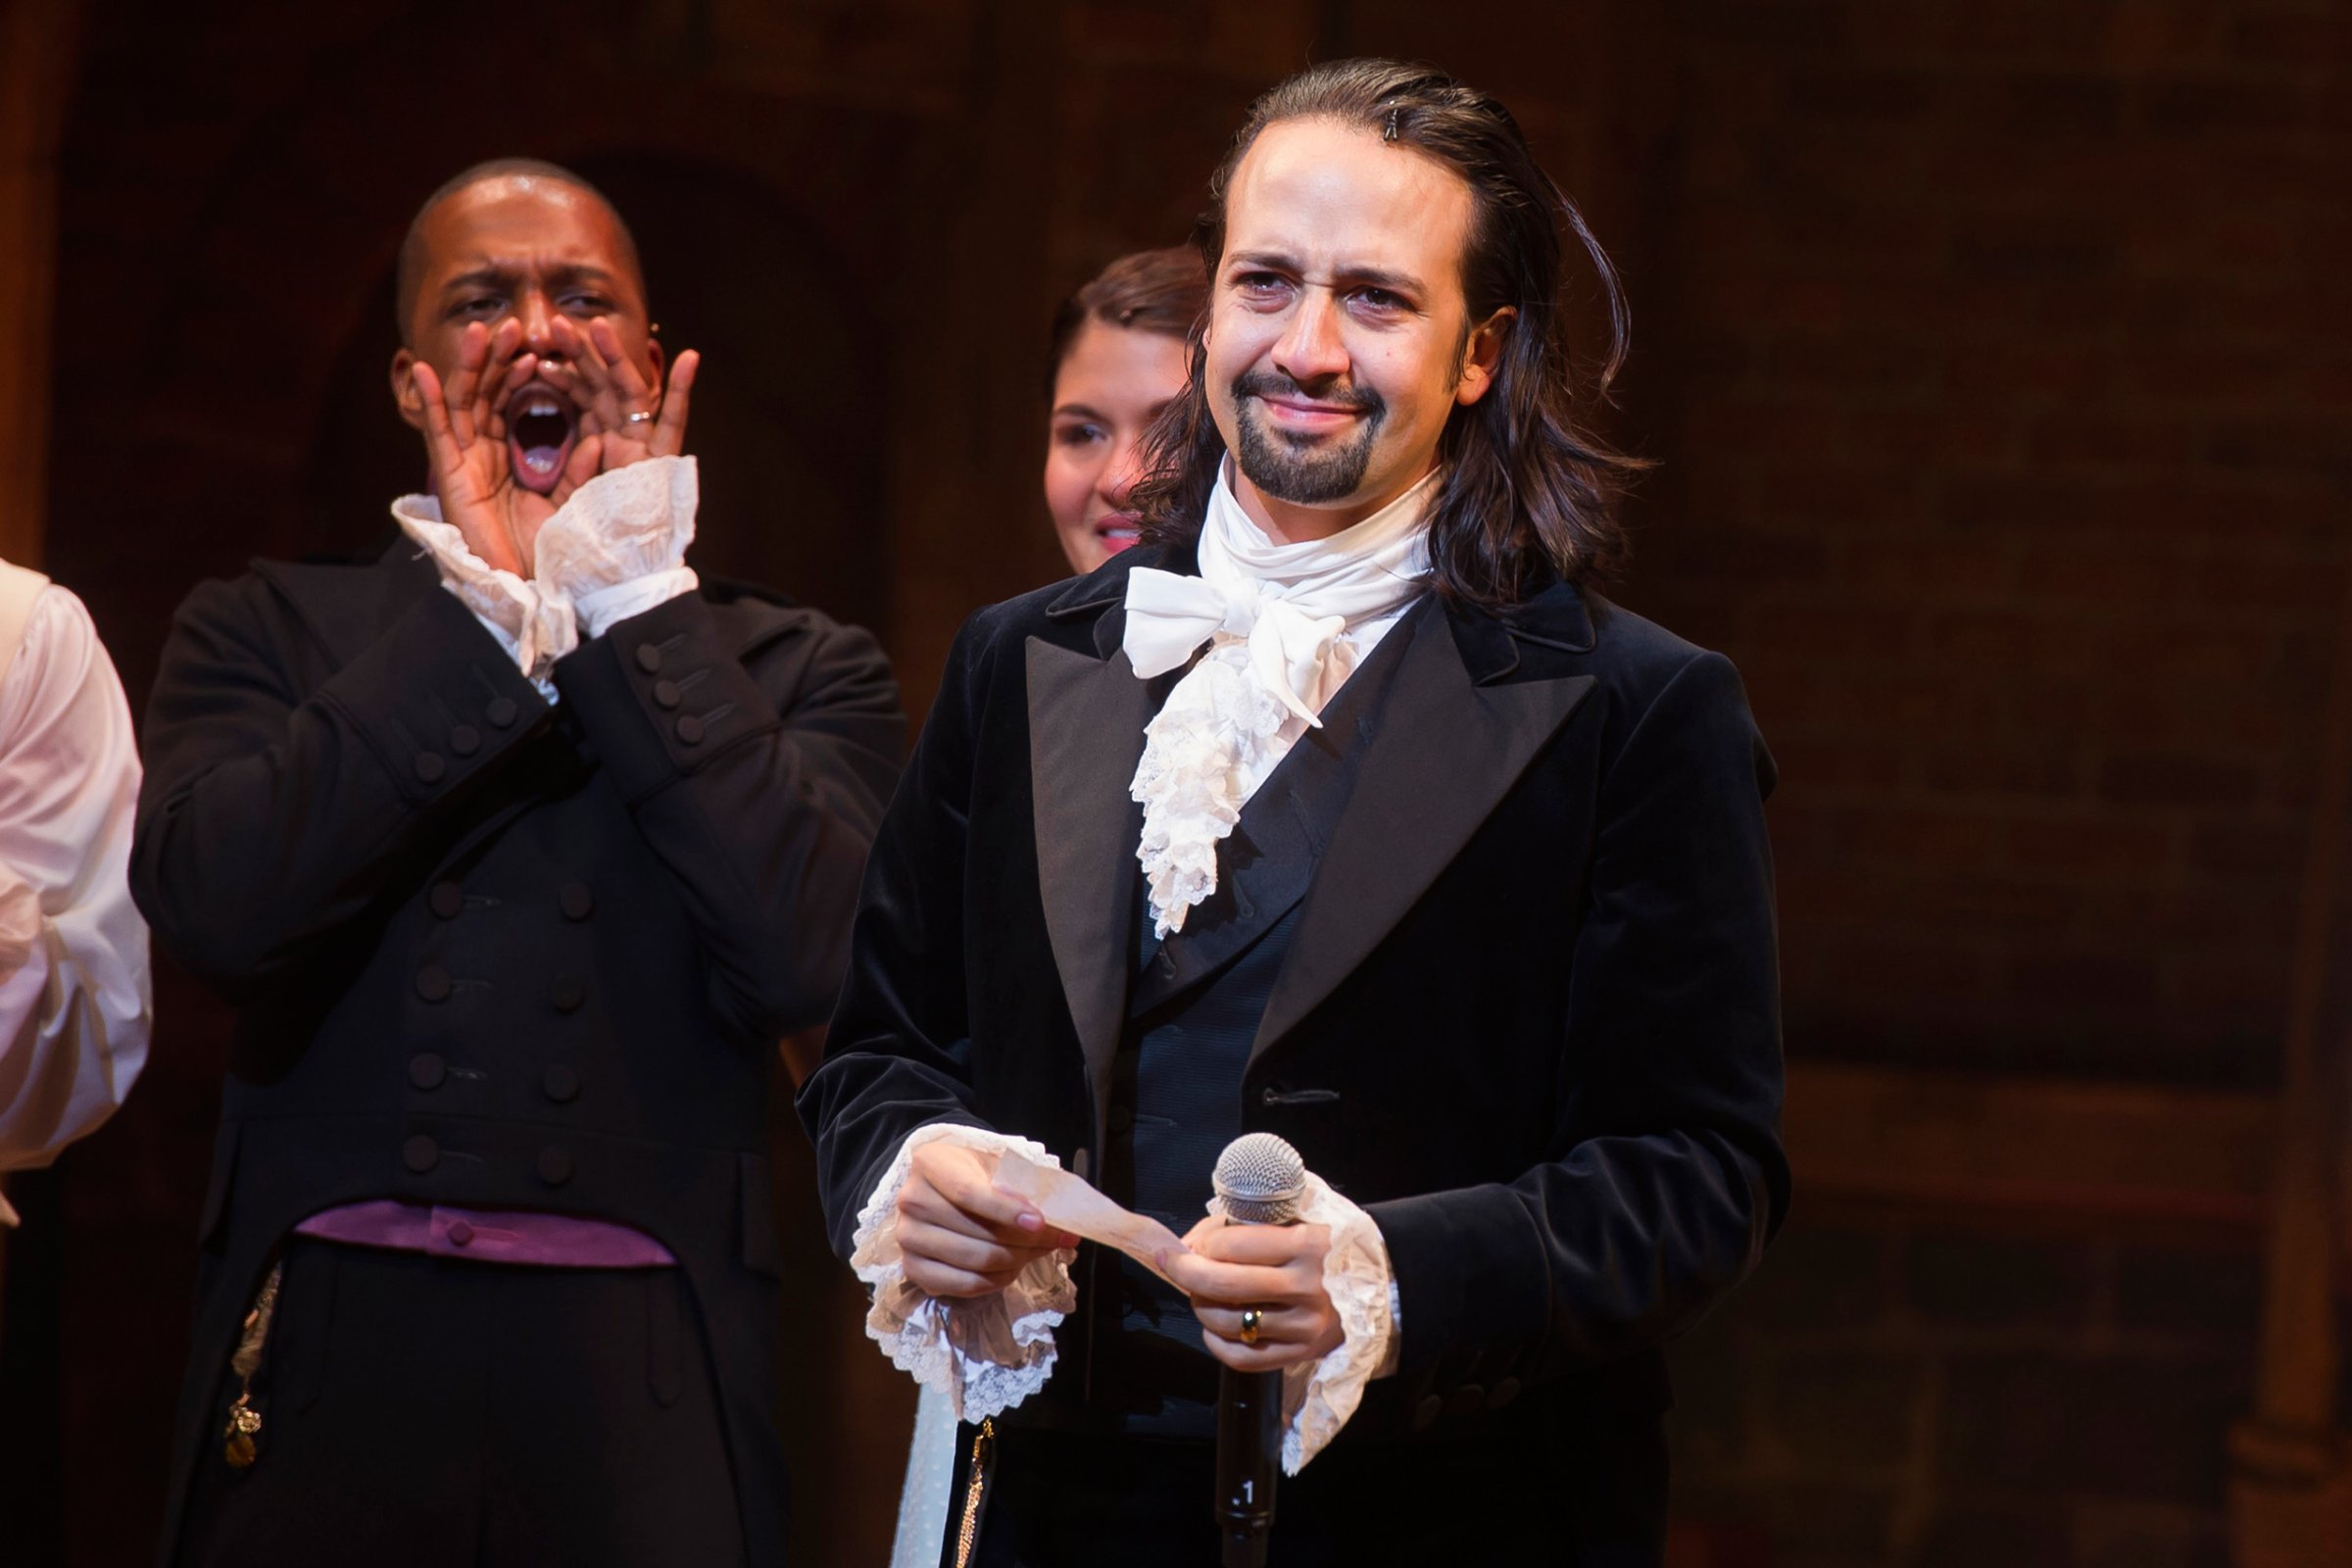 Lin-Manuel Miranda appears at the curtain call following the opening night performance of "Hamilton" at the Richard Rodgers Theatre in New York, on Aug. 6, 2015.